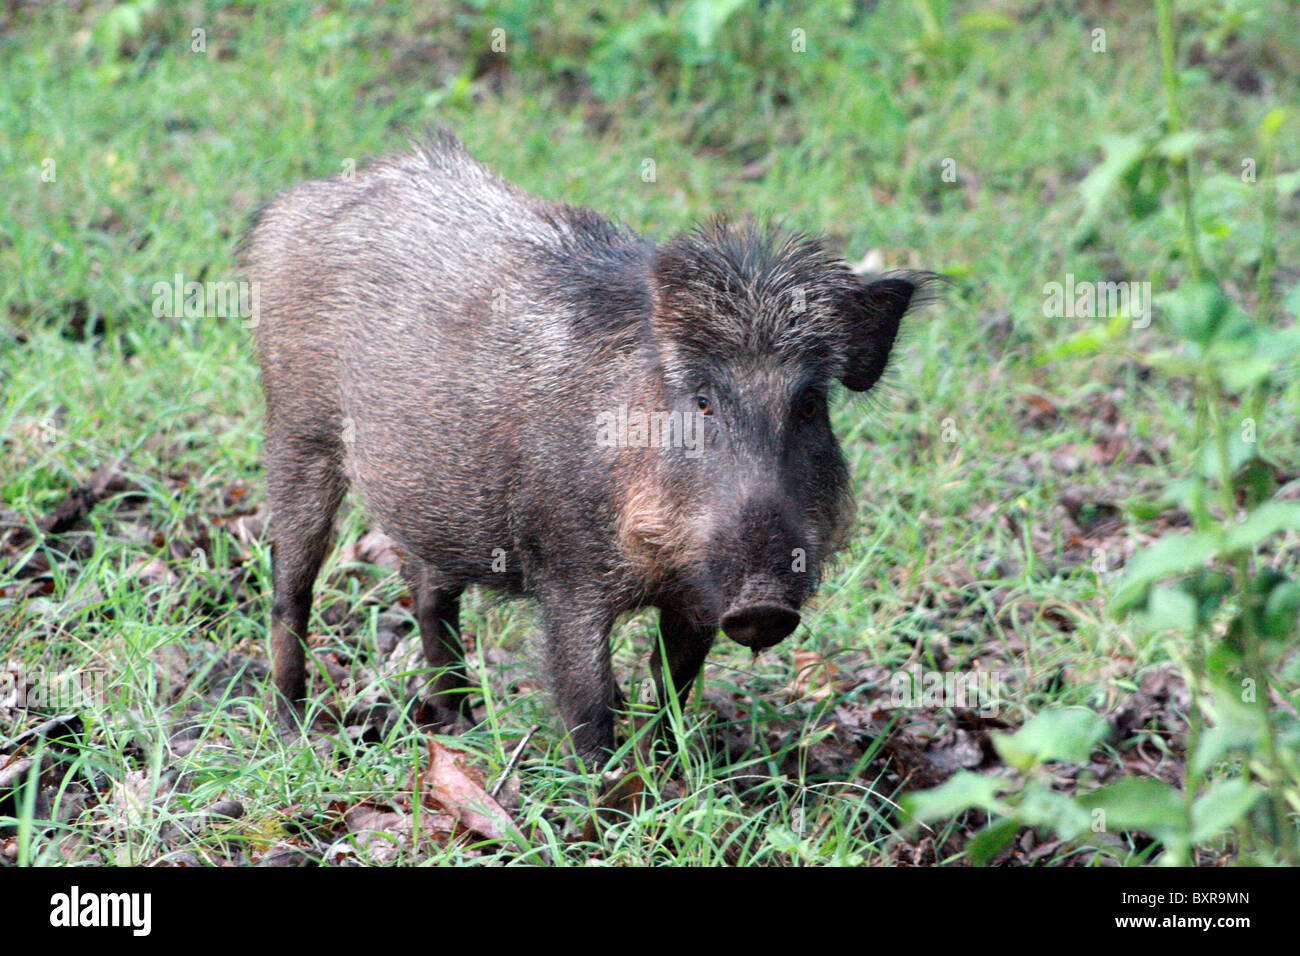 Wild boar are also known by various names, including wild hogs or ...